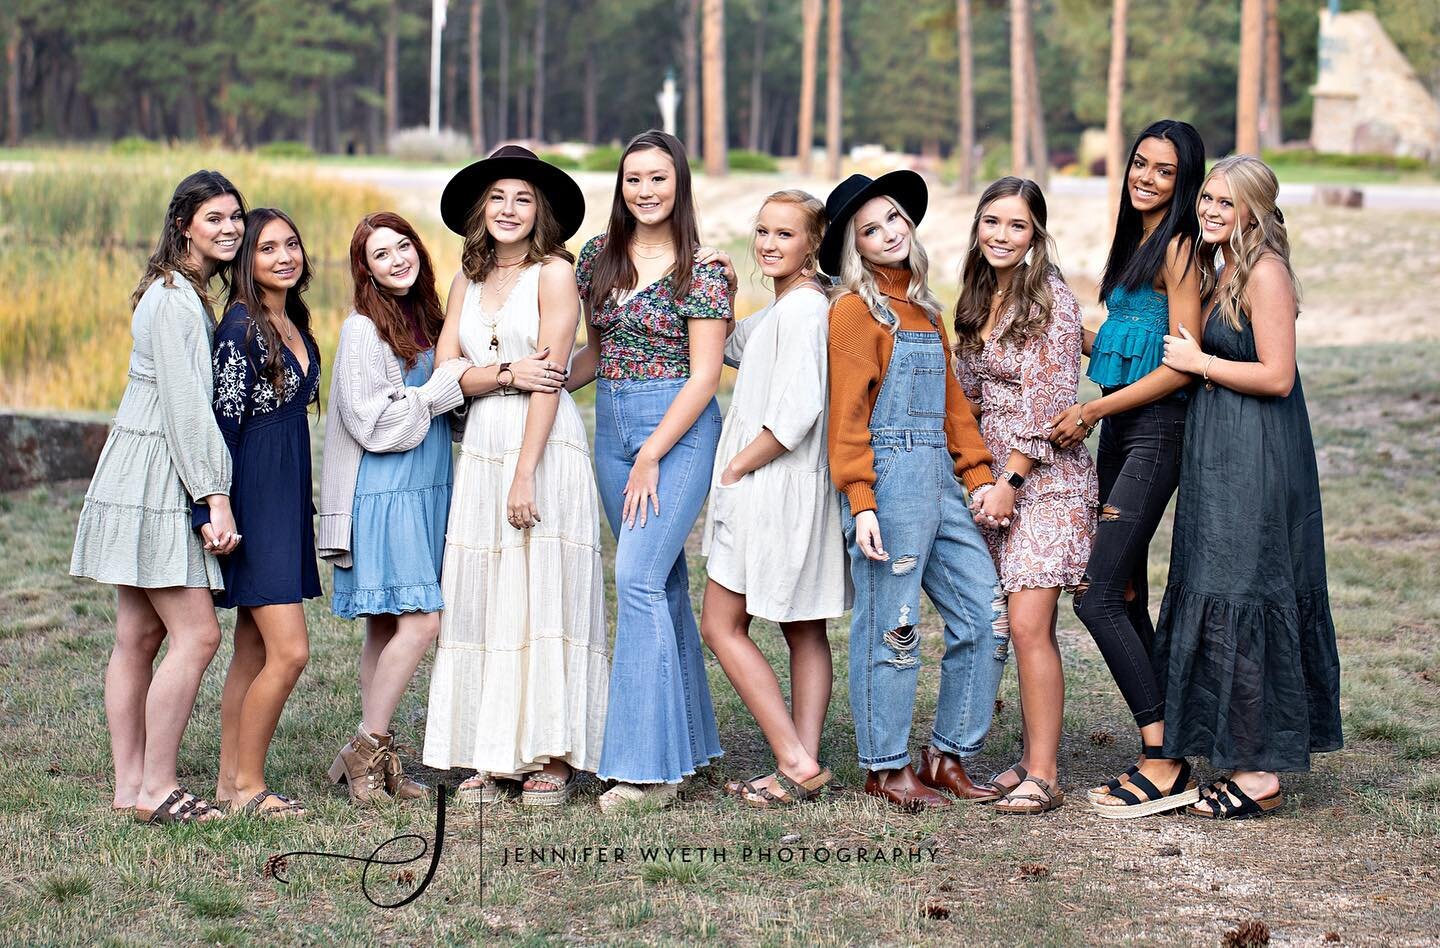 Couldn&rsquo;t love these sweet girls more!! Such a fabulous spokesmodel team!!